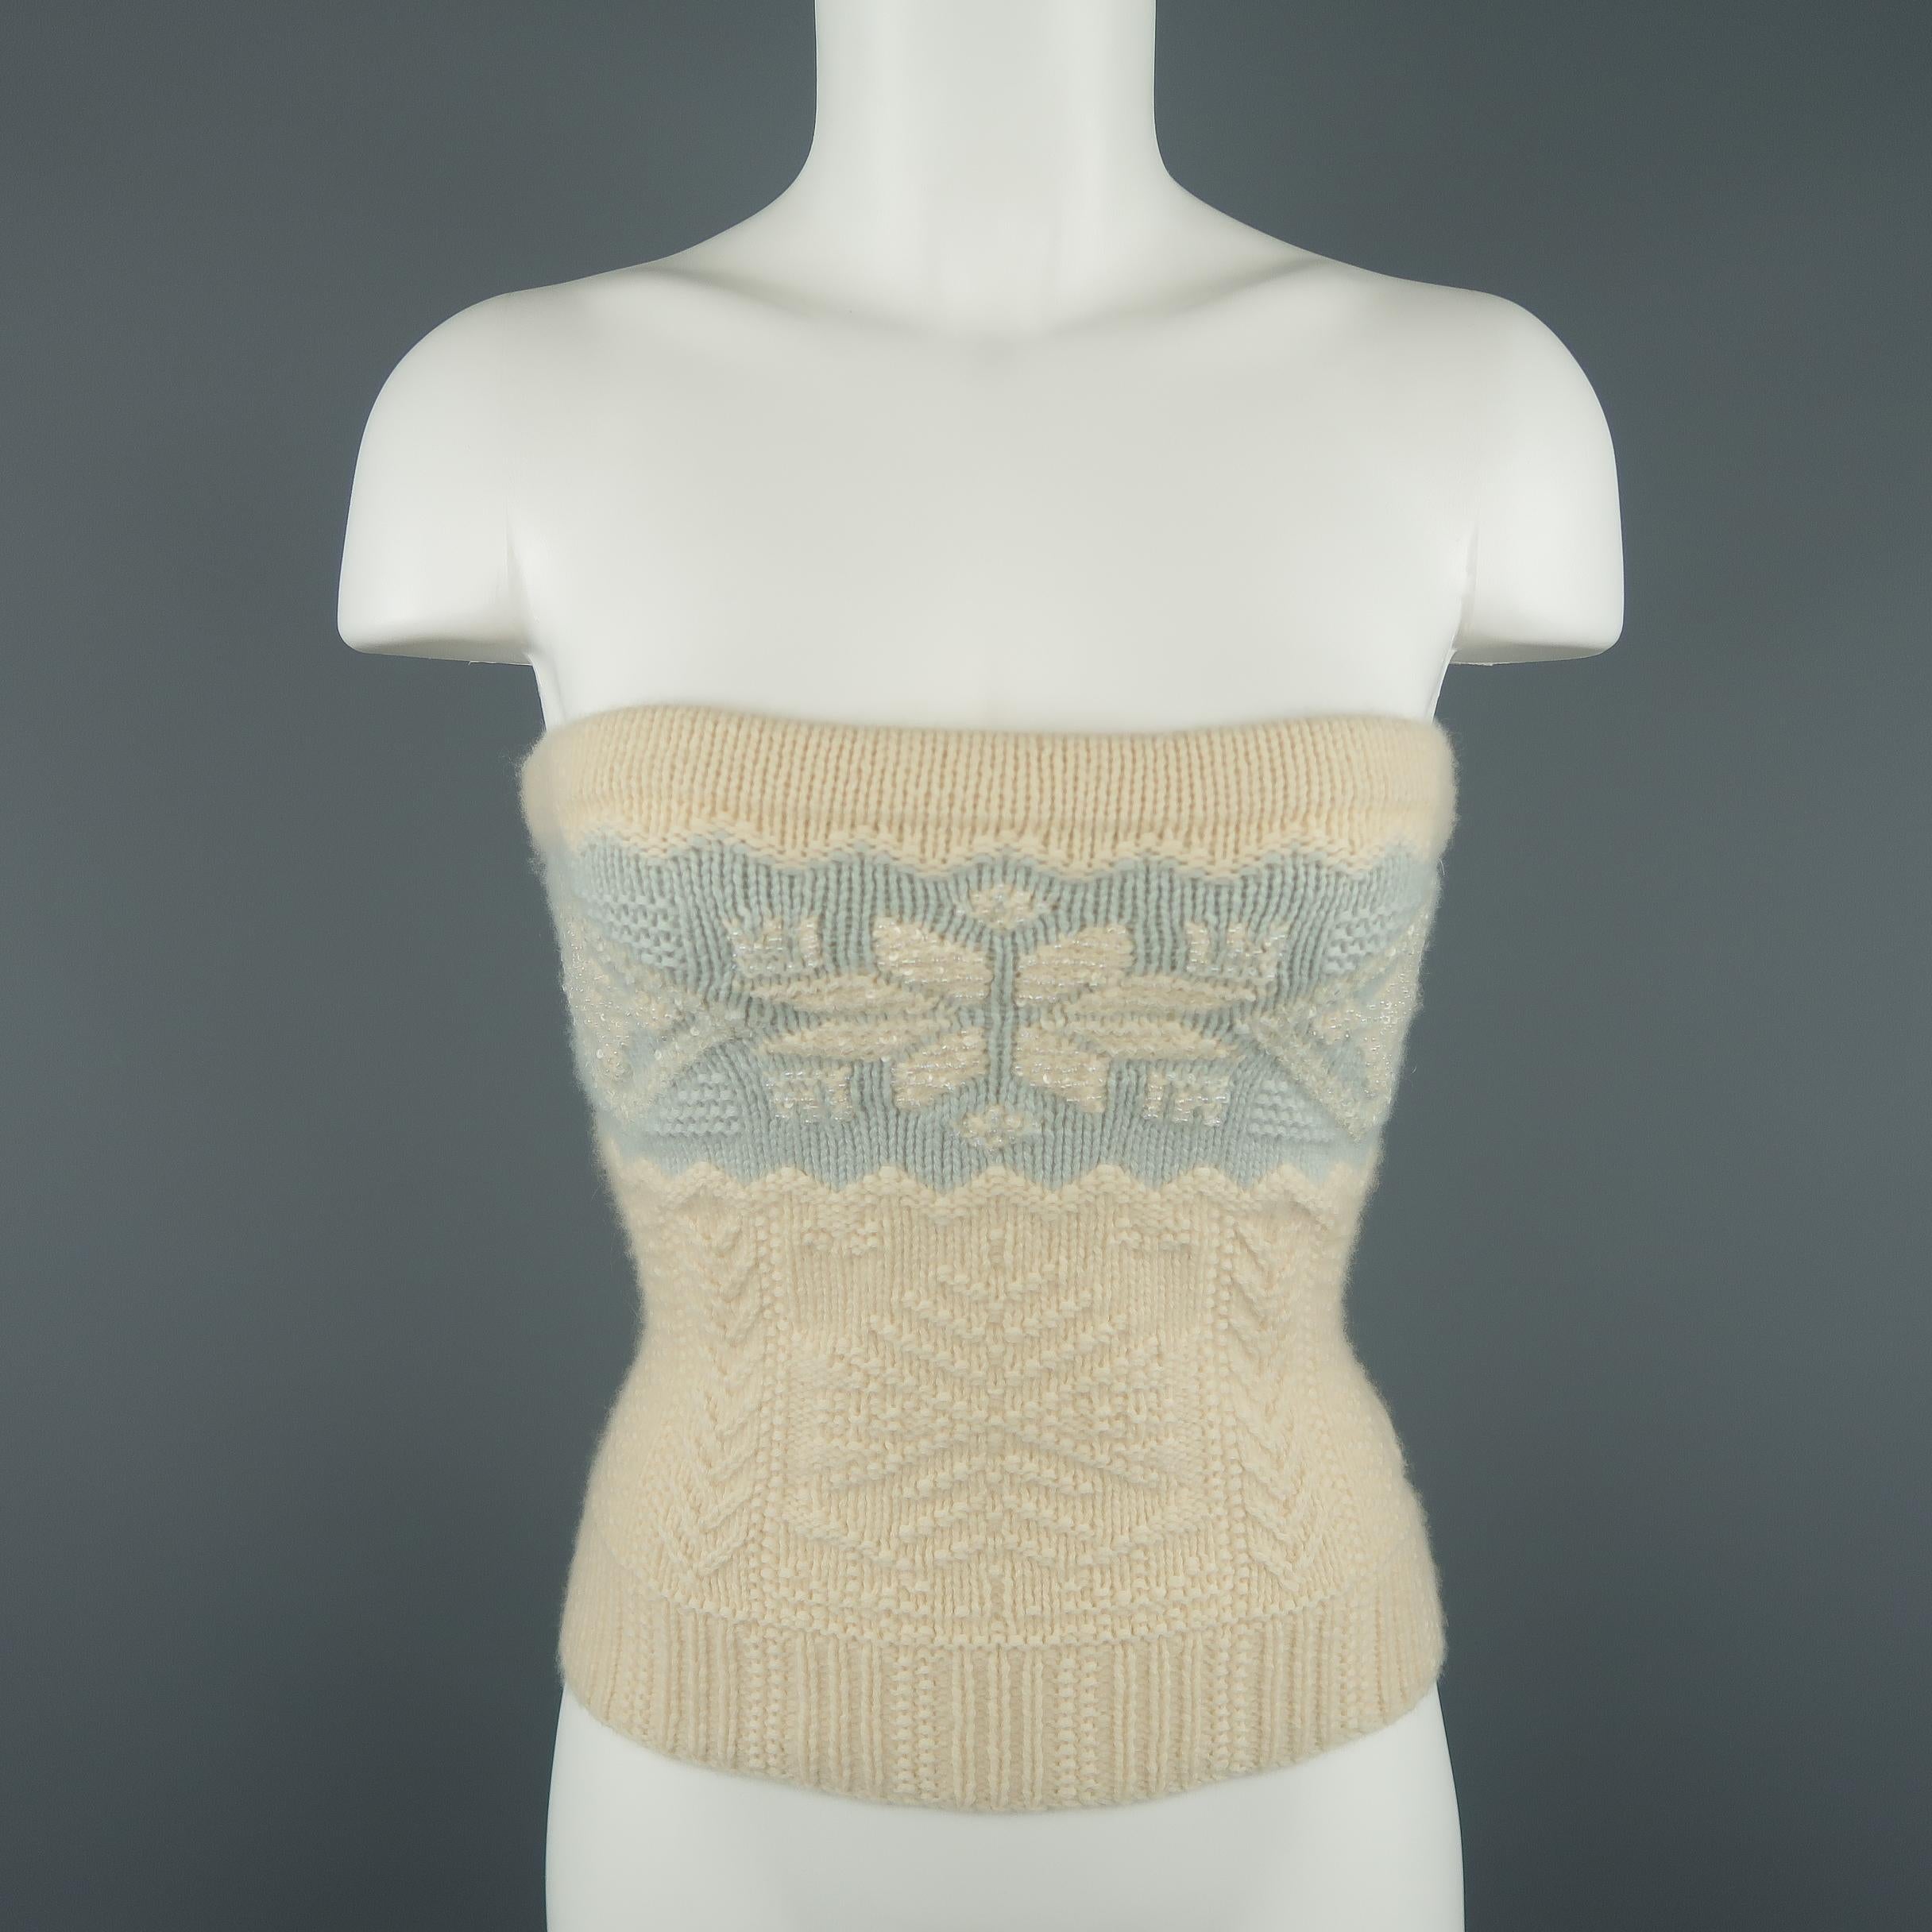 RALPH LAUREN BLACK LABEL strapless tube top comes in a cream beige textured knit with a blue beaded snowflake stripe motif.
 
Excellent Pre-Owned Condition.
Marked: M
 
Measurements:
 
Bust: 32 in.
Waist: 28 in.
Length: 13 in.